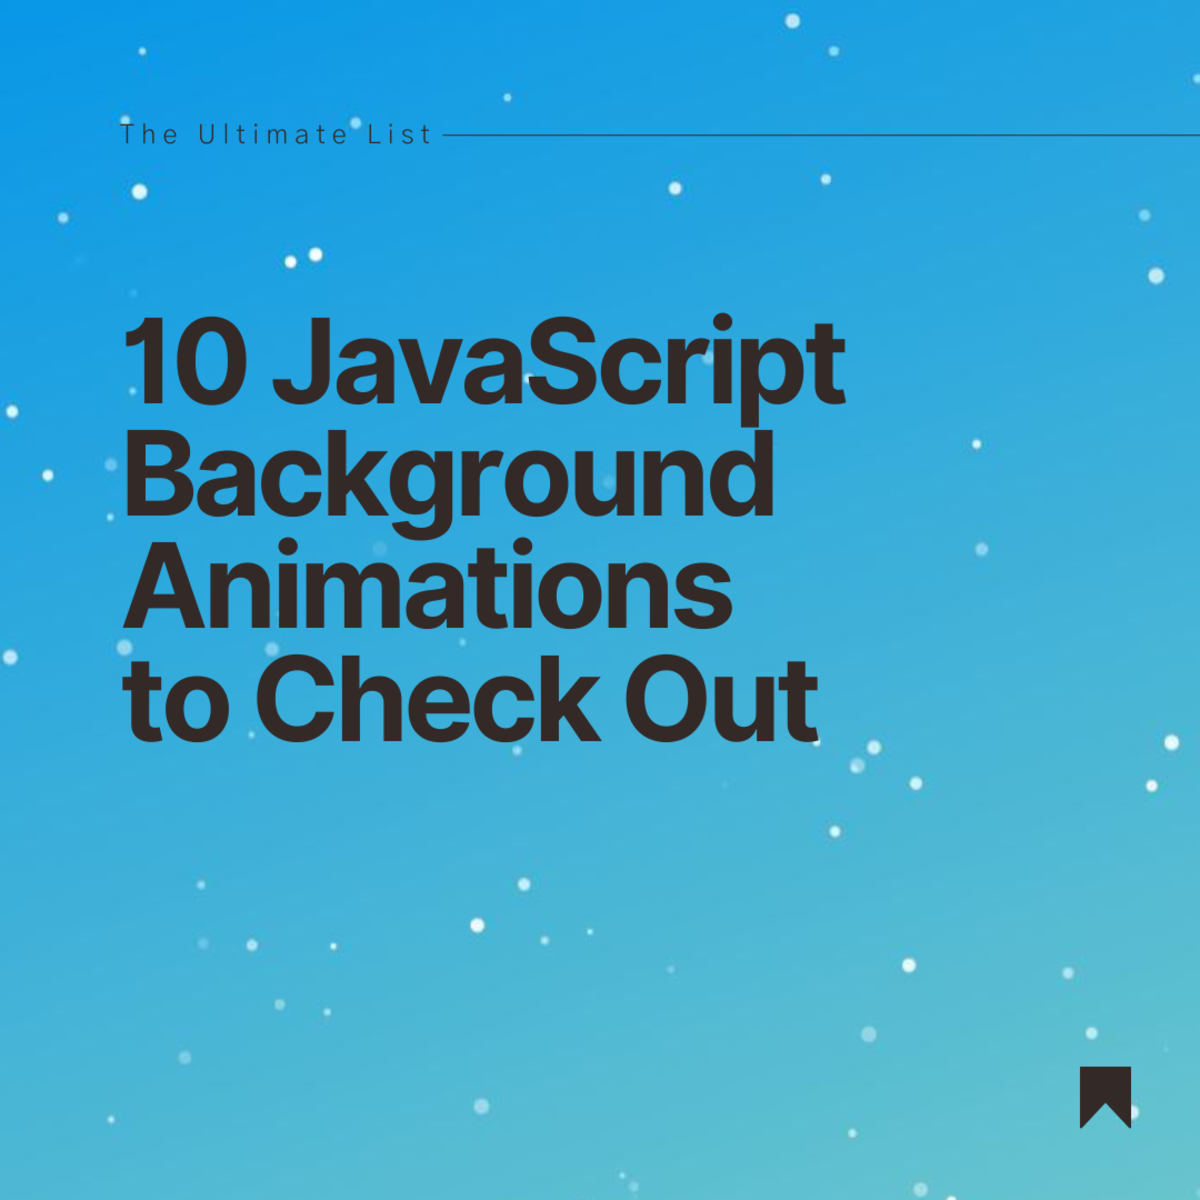 Discover amazing JavaScript background animations you can quickly add to your site right now!